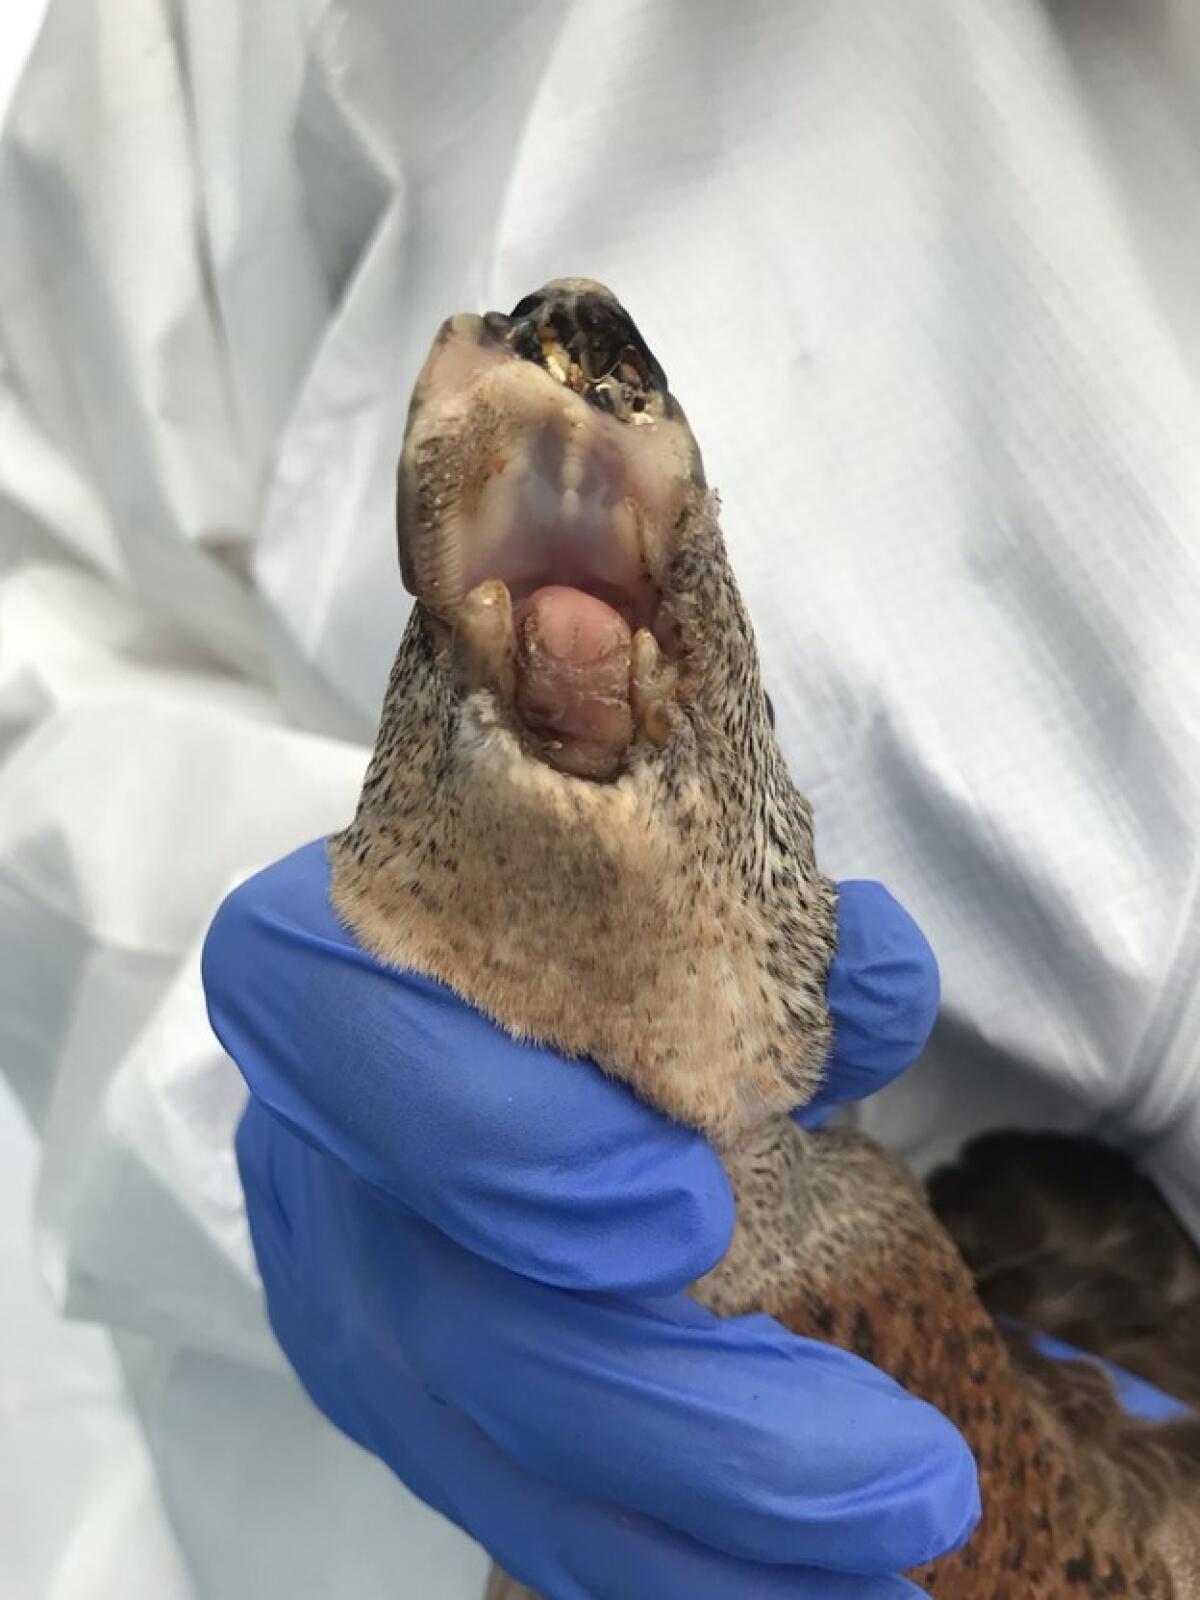 The severe injury sustained by a duck found with its bill severed is displayed by staff at Wetlands & Wildlife Care Center.